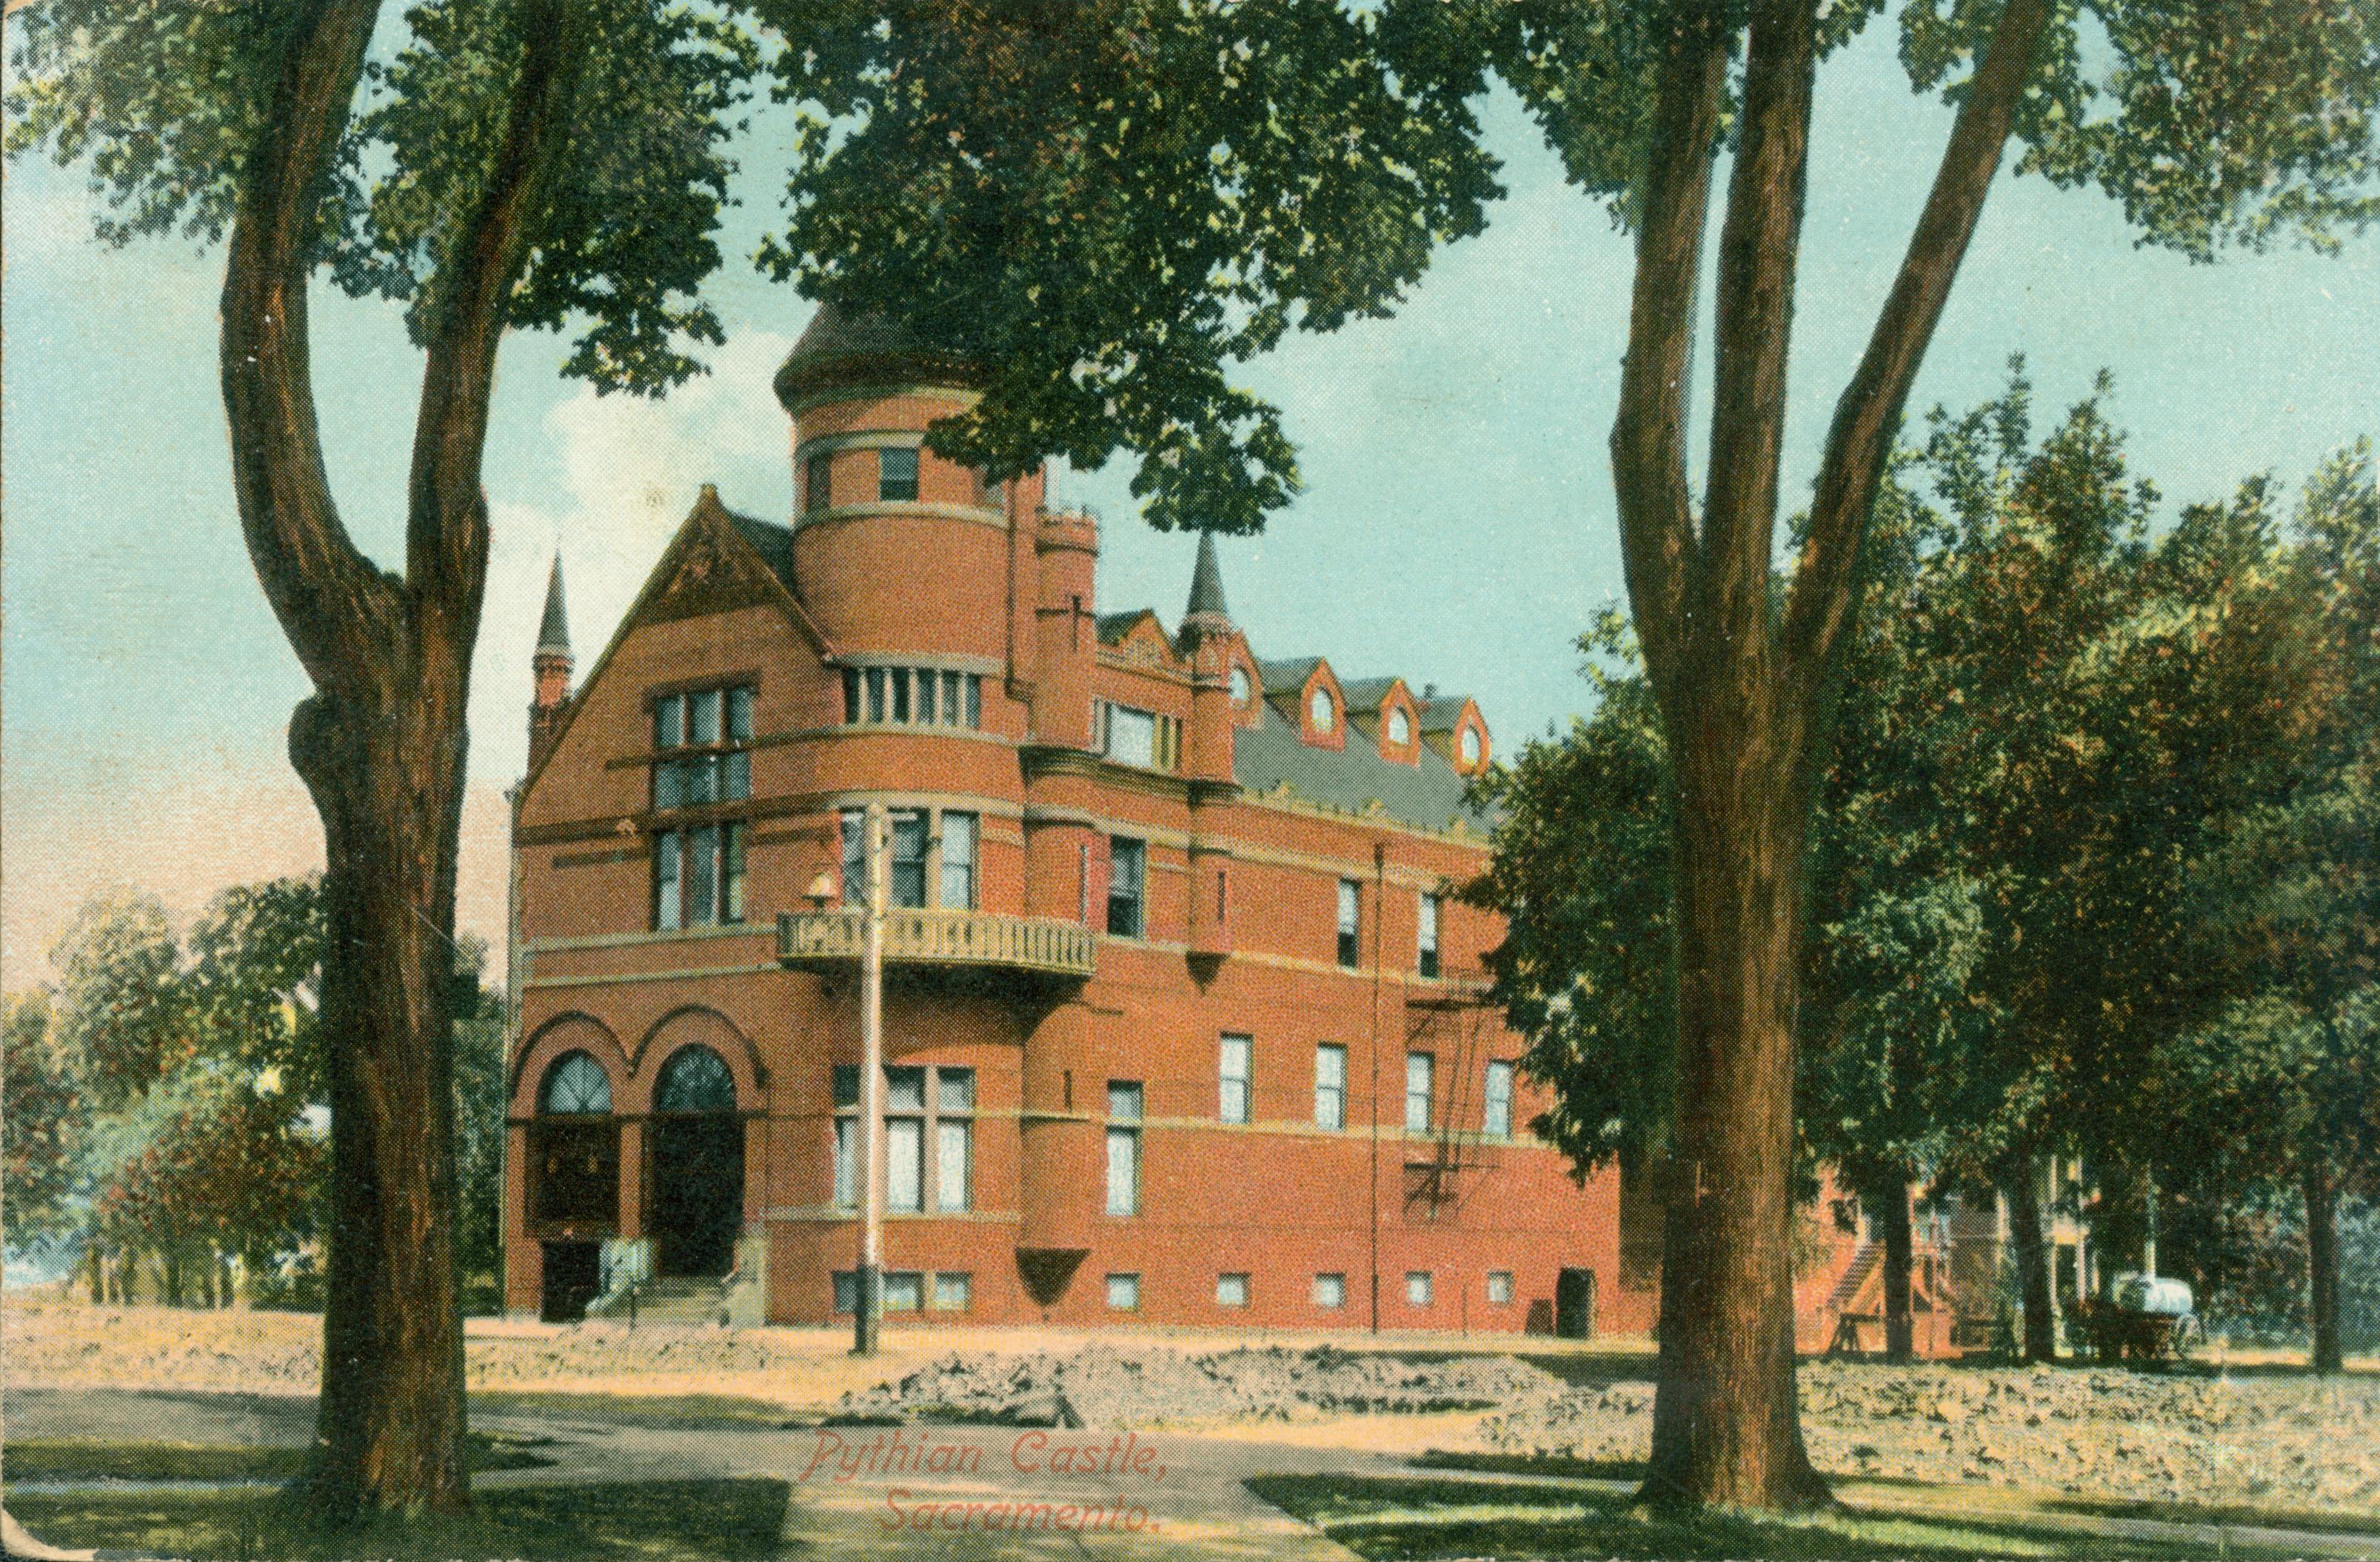 This postcard shows the Pythian Castle, a red brick building, framed by trees.